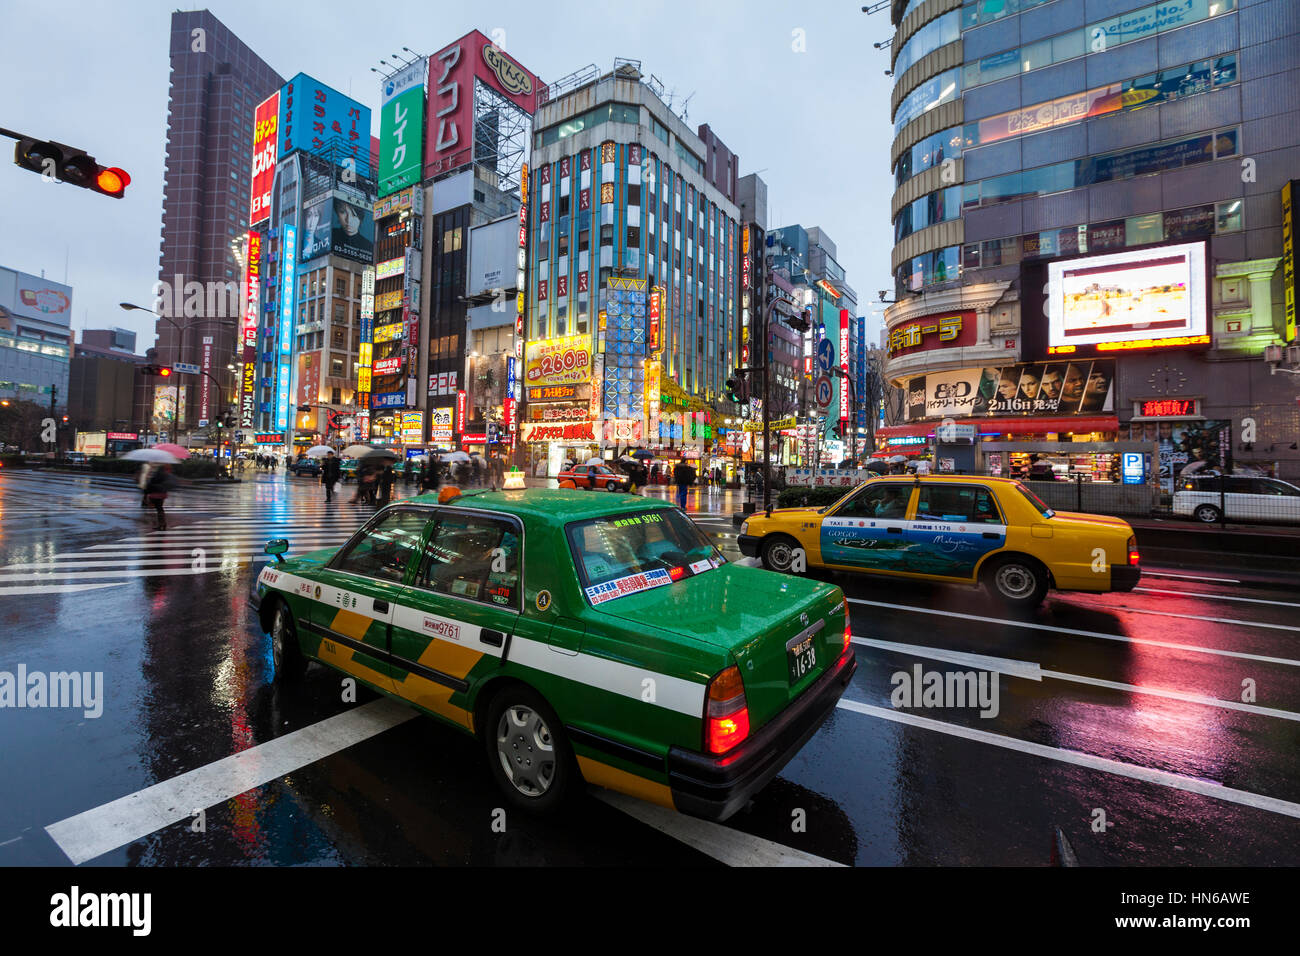 Tokyo, Japan - March 2, 2012: On a rainy evening, two Tokyo taxis wait at a road junction on Yasukuni Dori in Shinjuku, with colourfully lit buildings Stock Photo